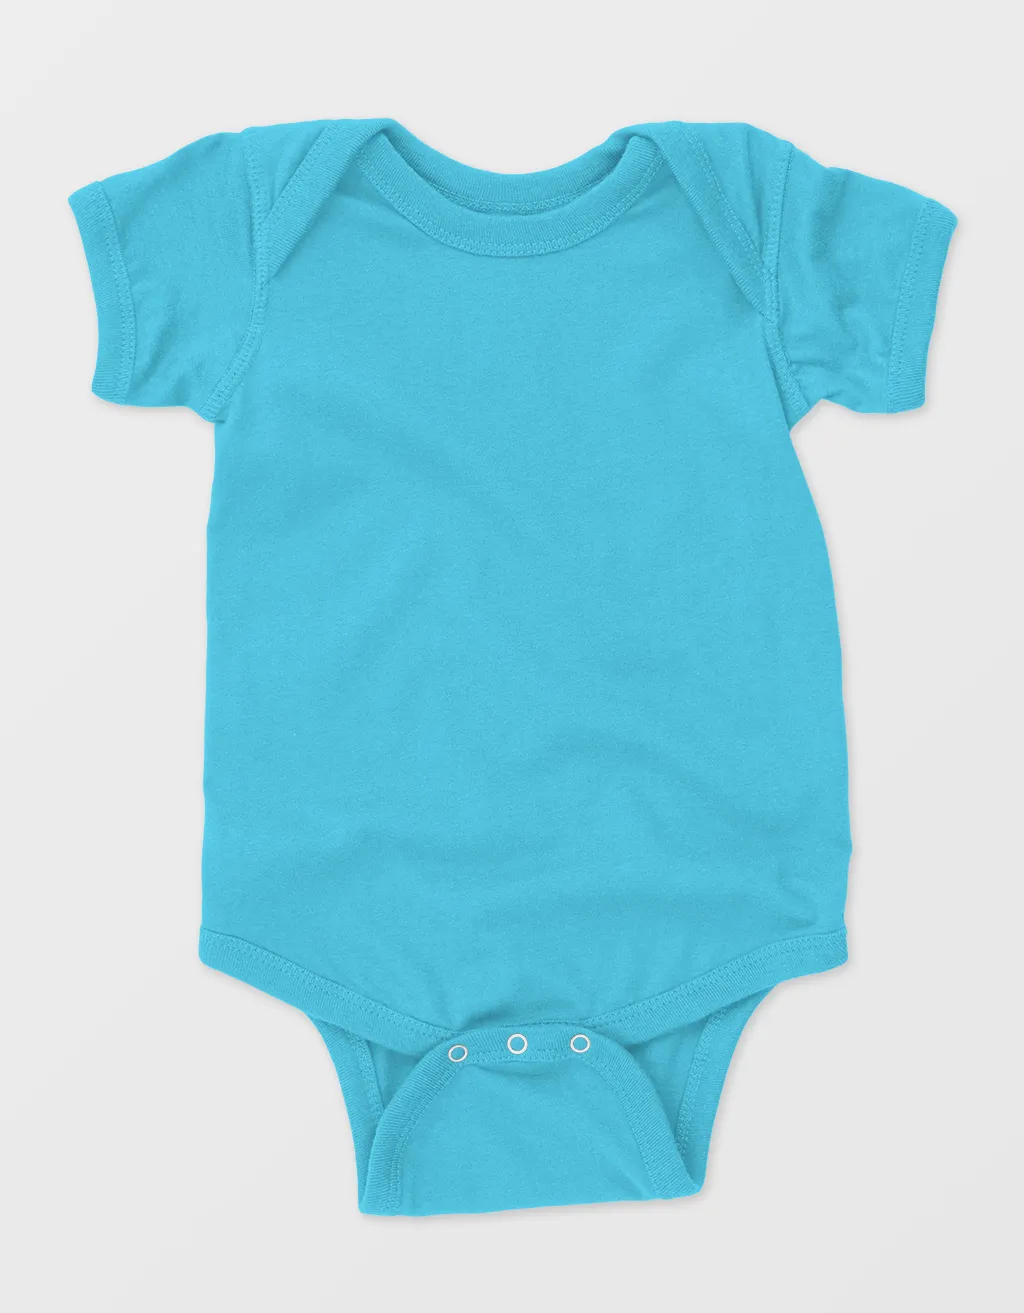 sky blue plain baby onesies for babies newborn baby clothes in india